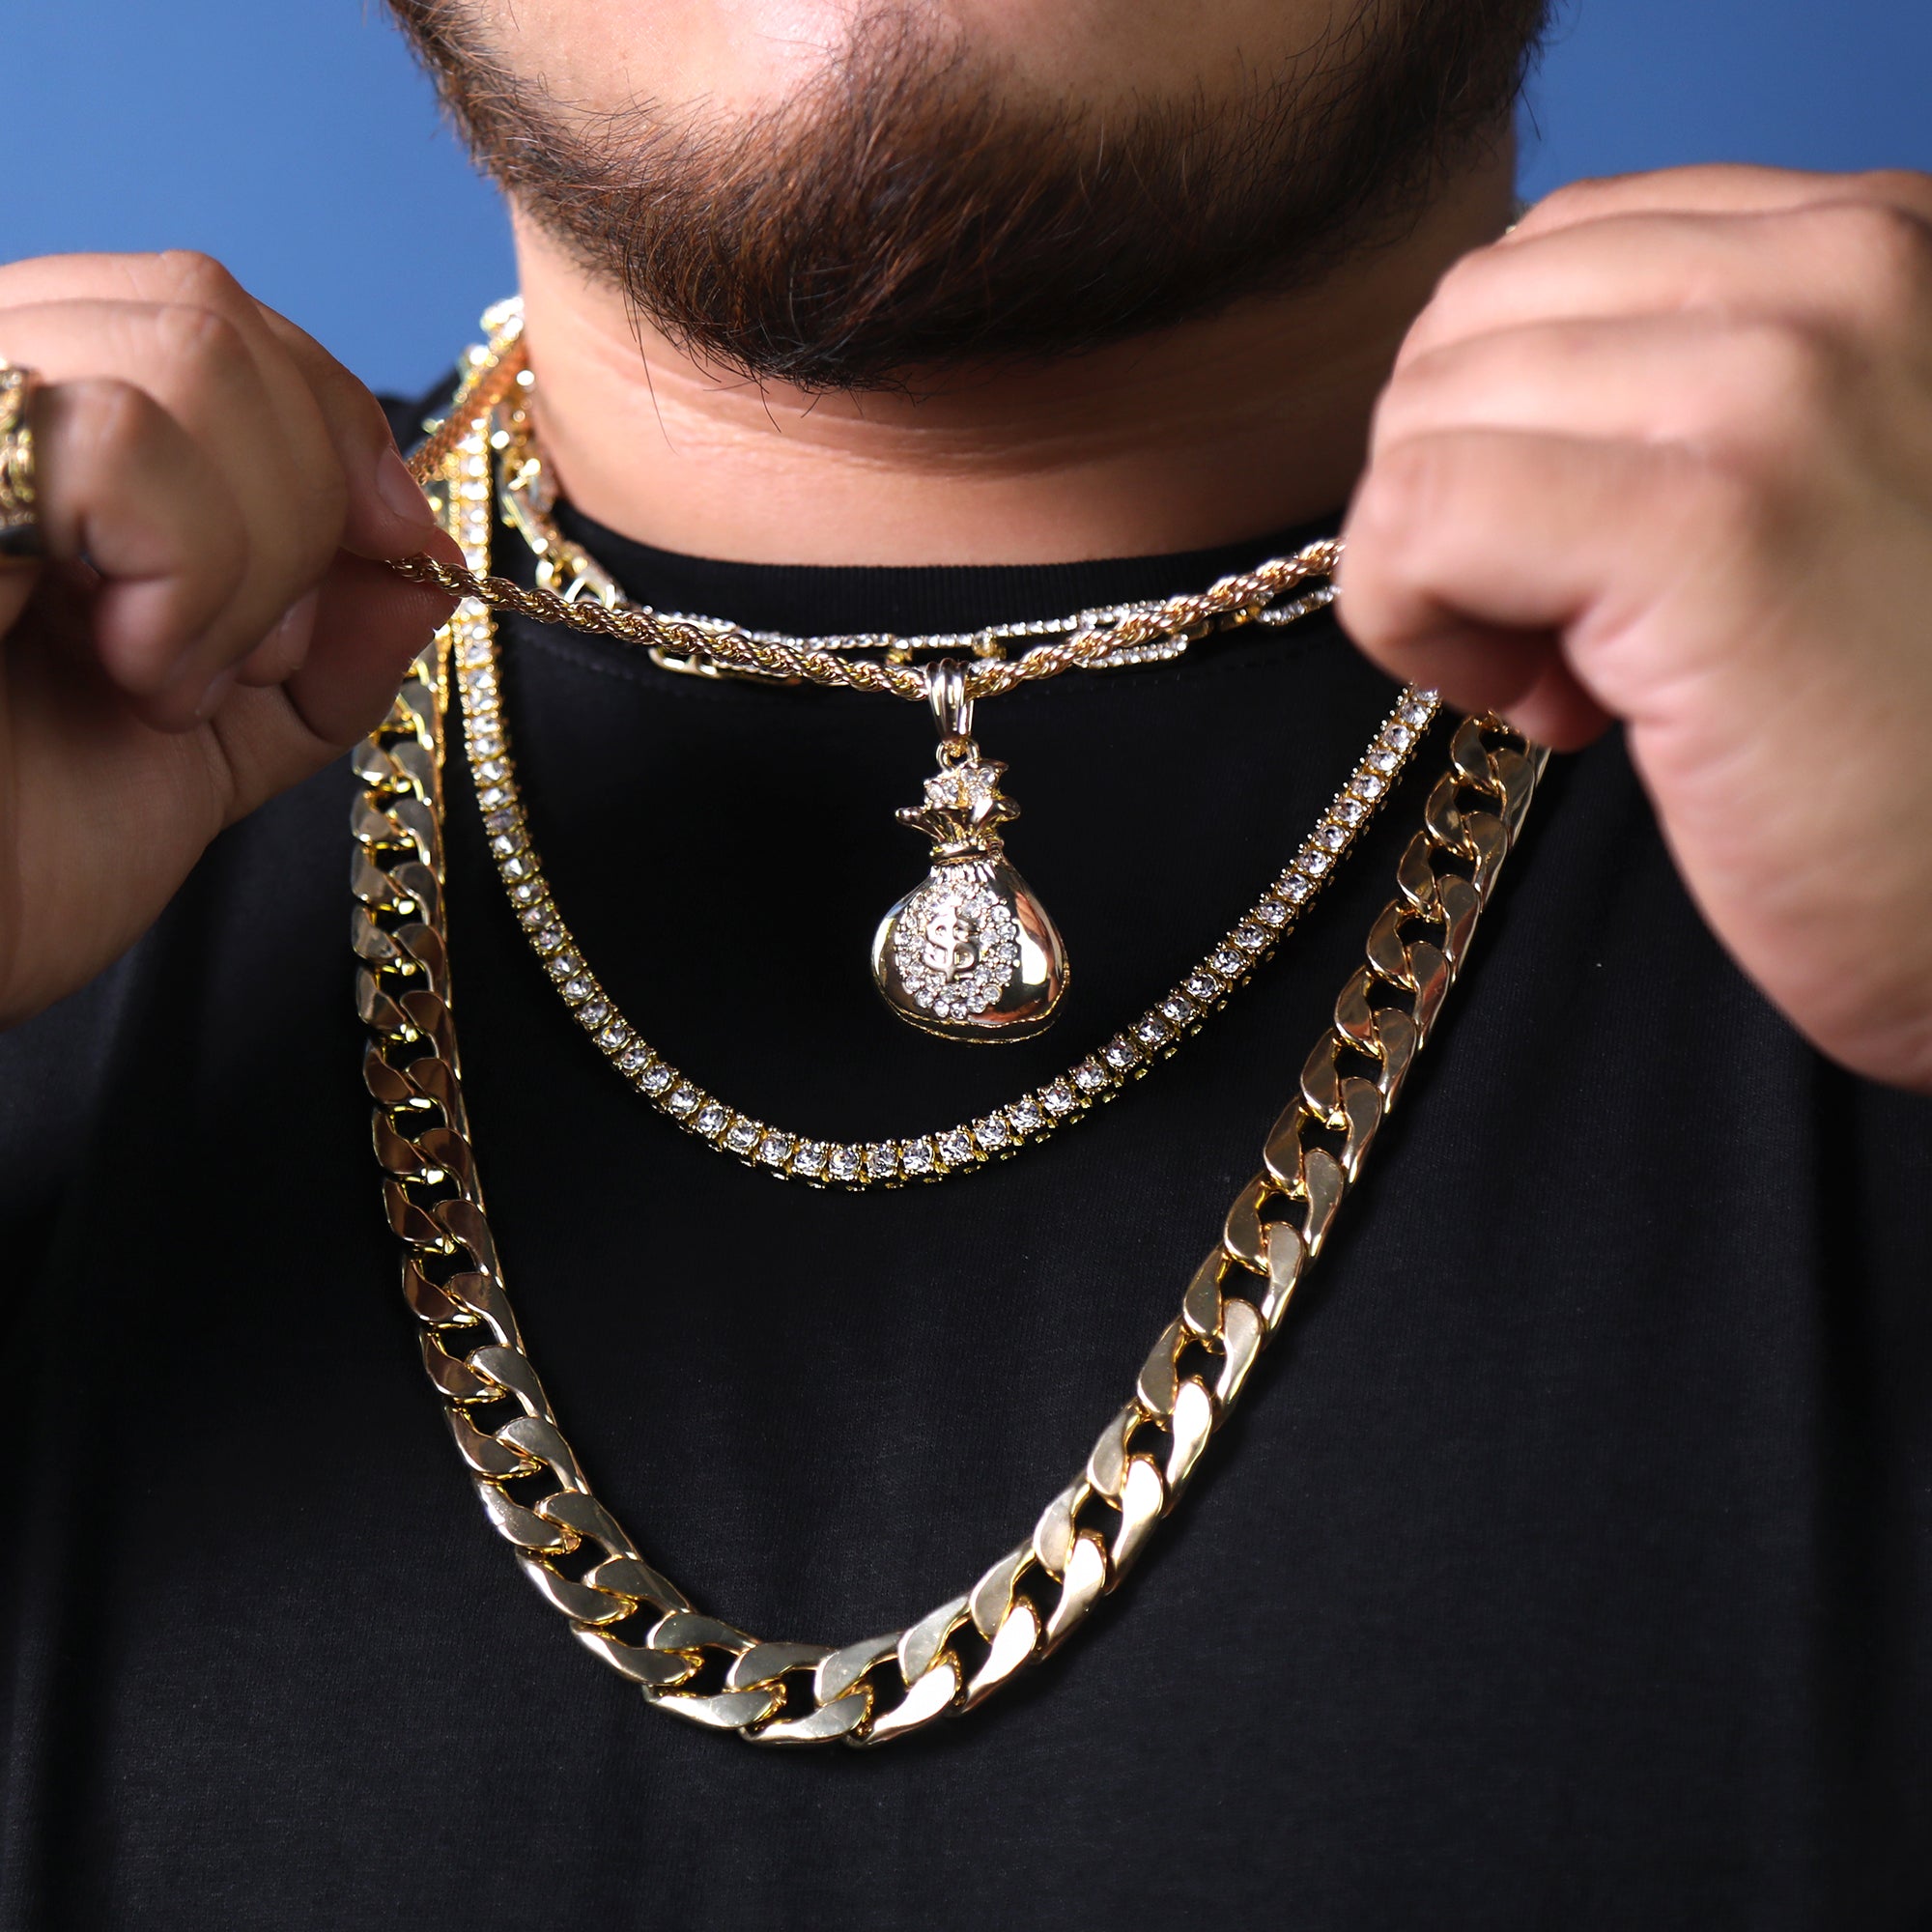 Bag Of Money Pendant 24" Rope Chain Hip Hop Style 18k Gold Plated Necklace